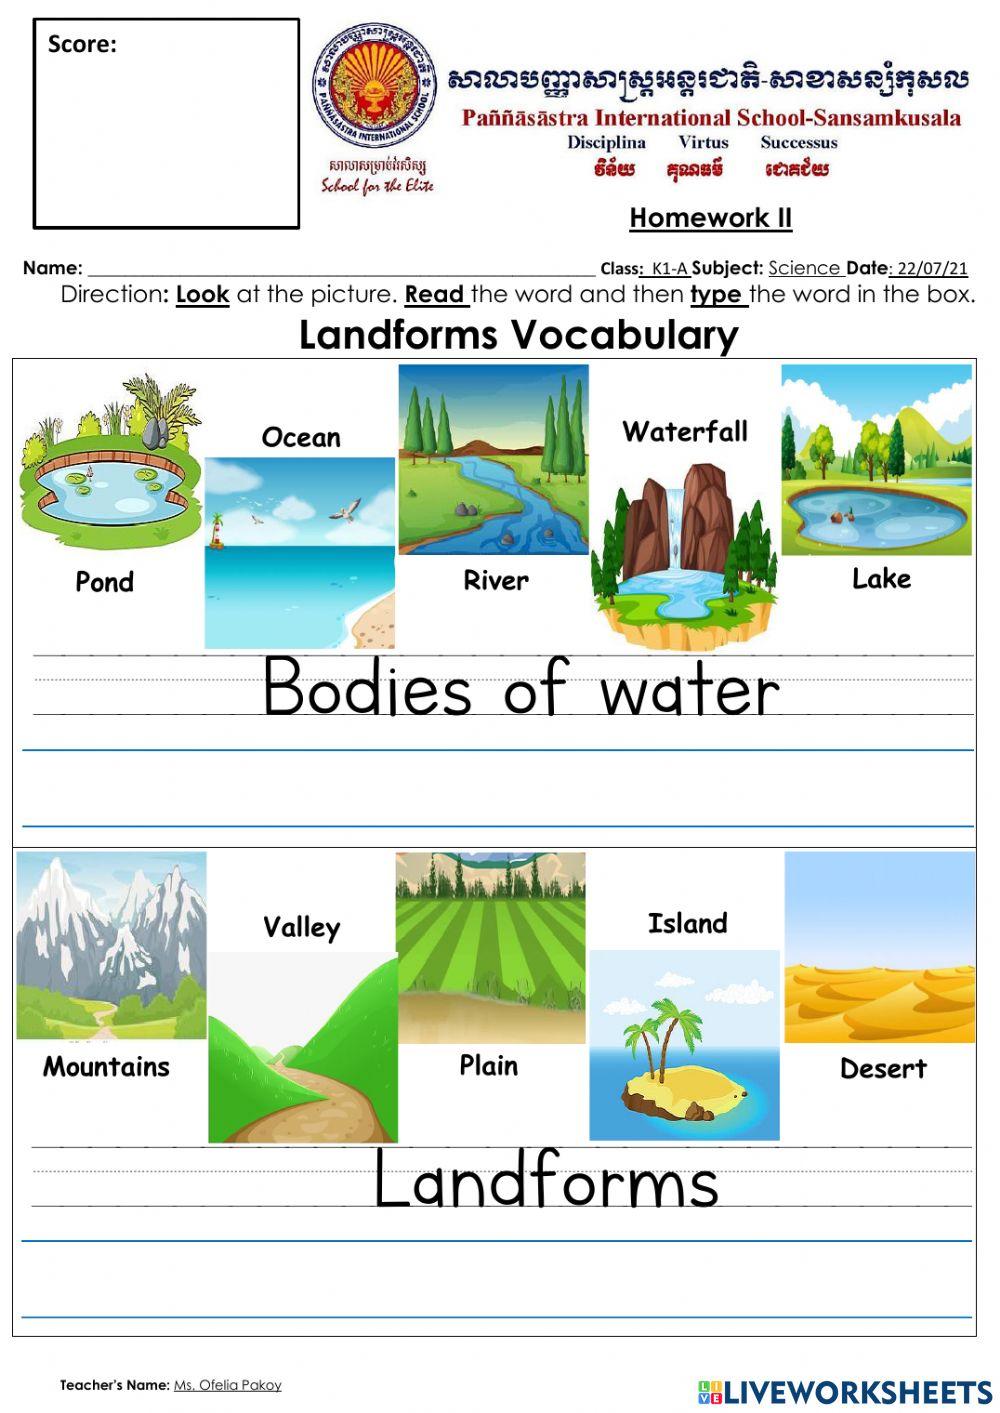 Bodies of water and Landforms